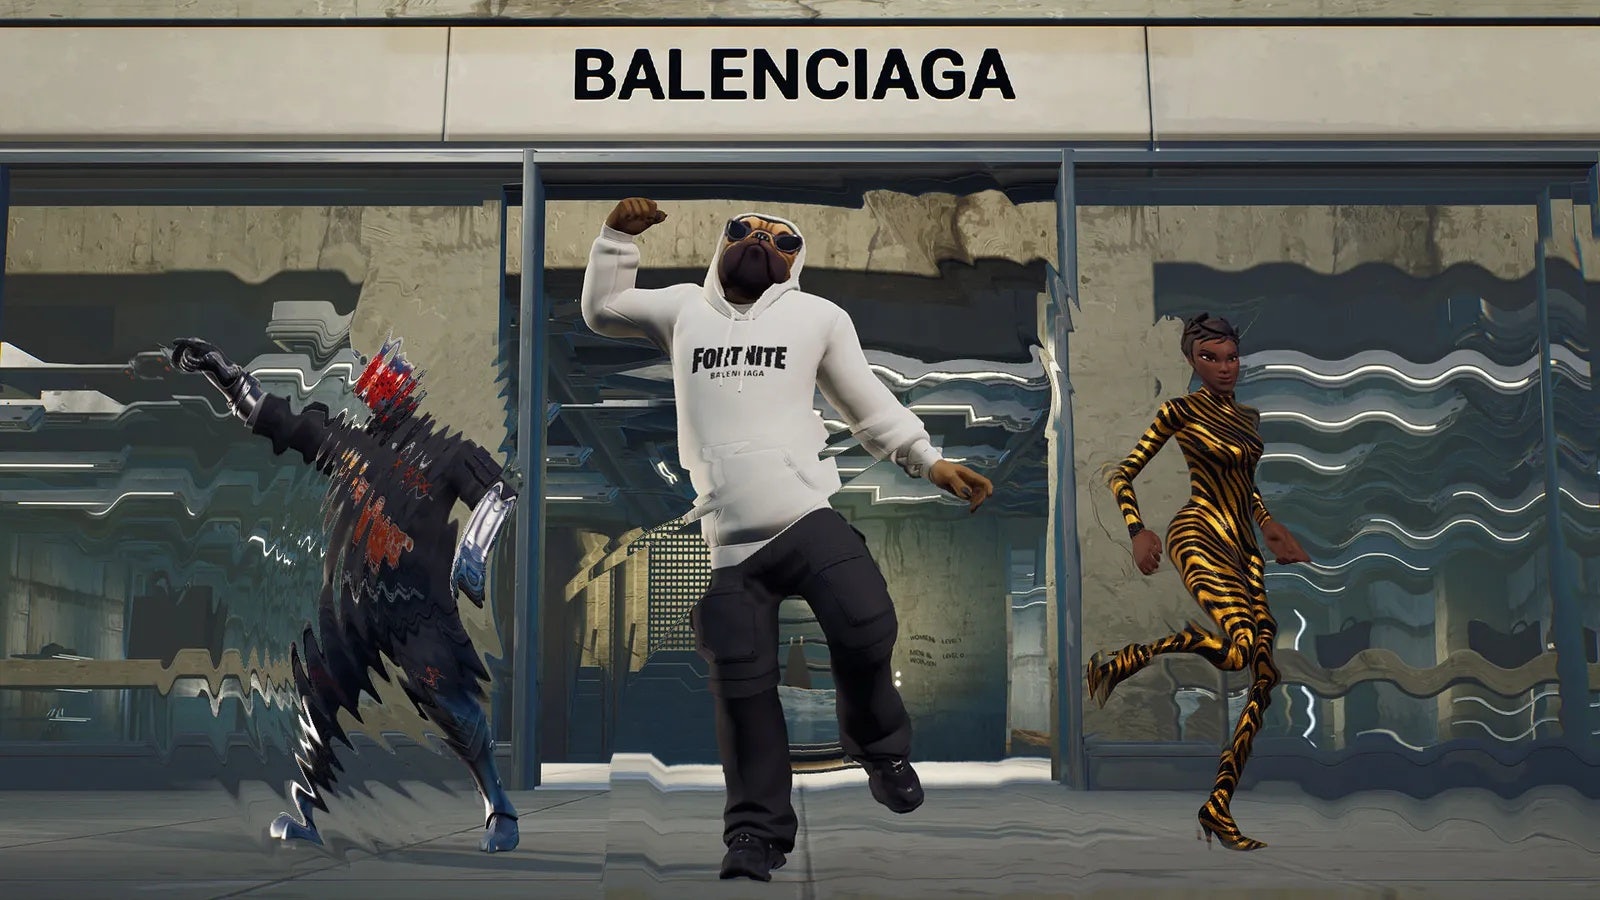 Balenciaga teamed up with Fortnite in 2021 on a phygital partnership. Image: Fortnite